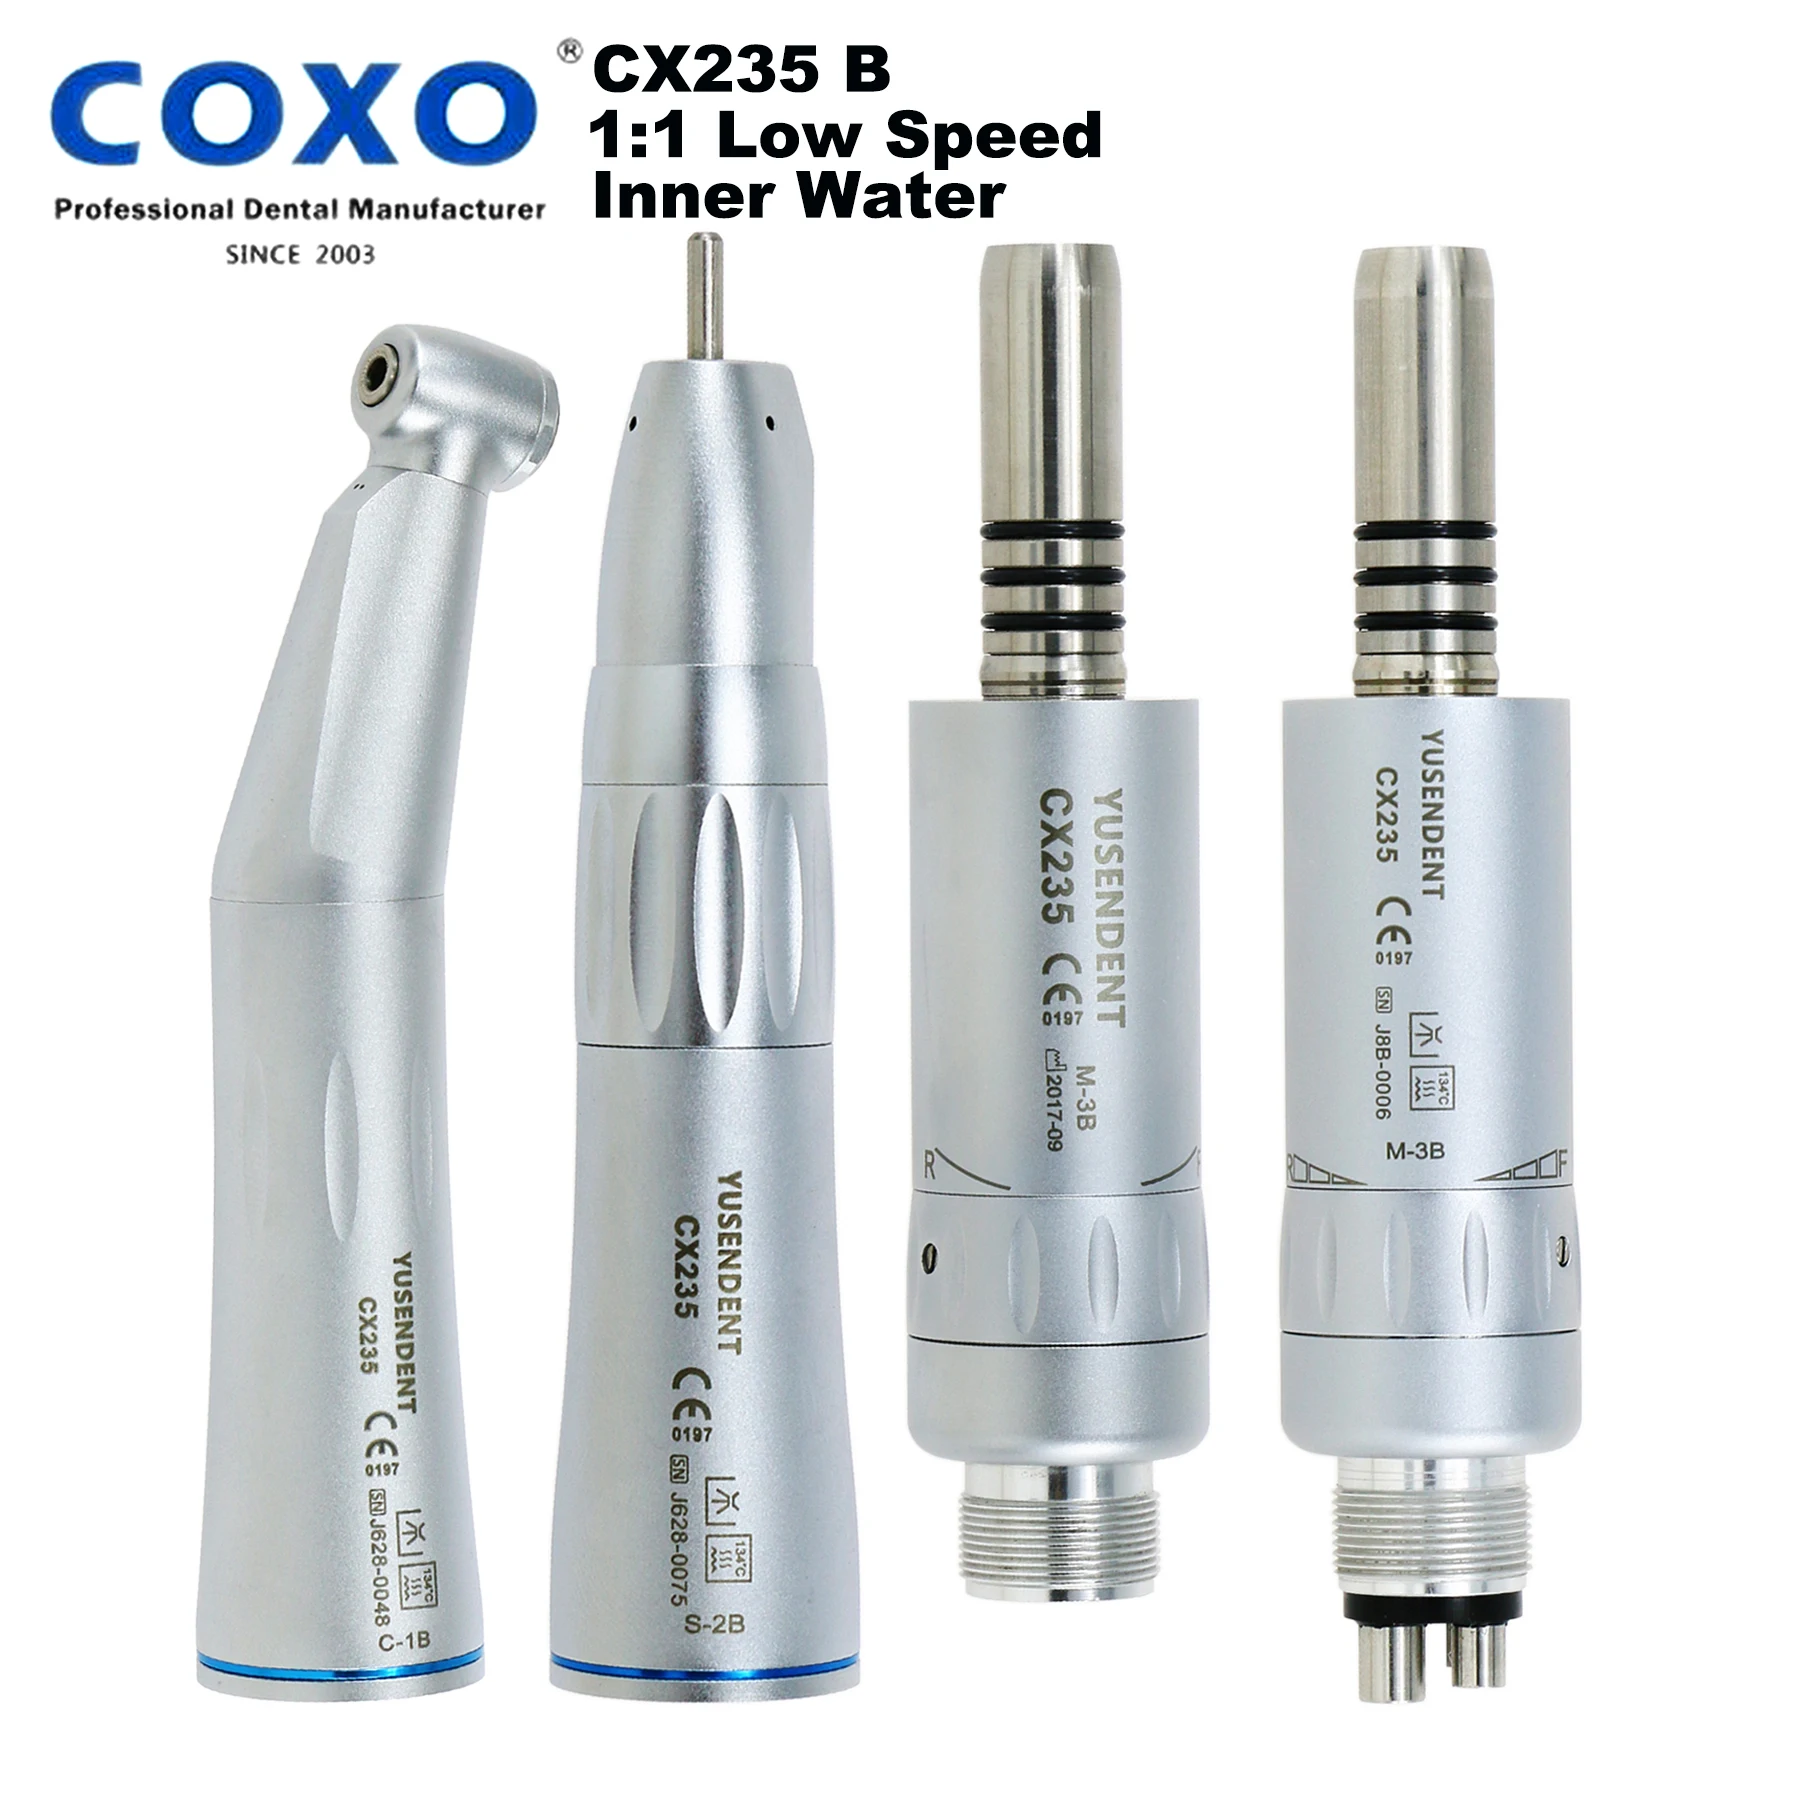 

COXO YUSENDENT Dental 1:1 Low Speed Inner Water Contra Angle Air Motor 2 4 Holes Fit For ISO E type Handpiece NSK KAVO